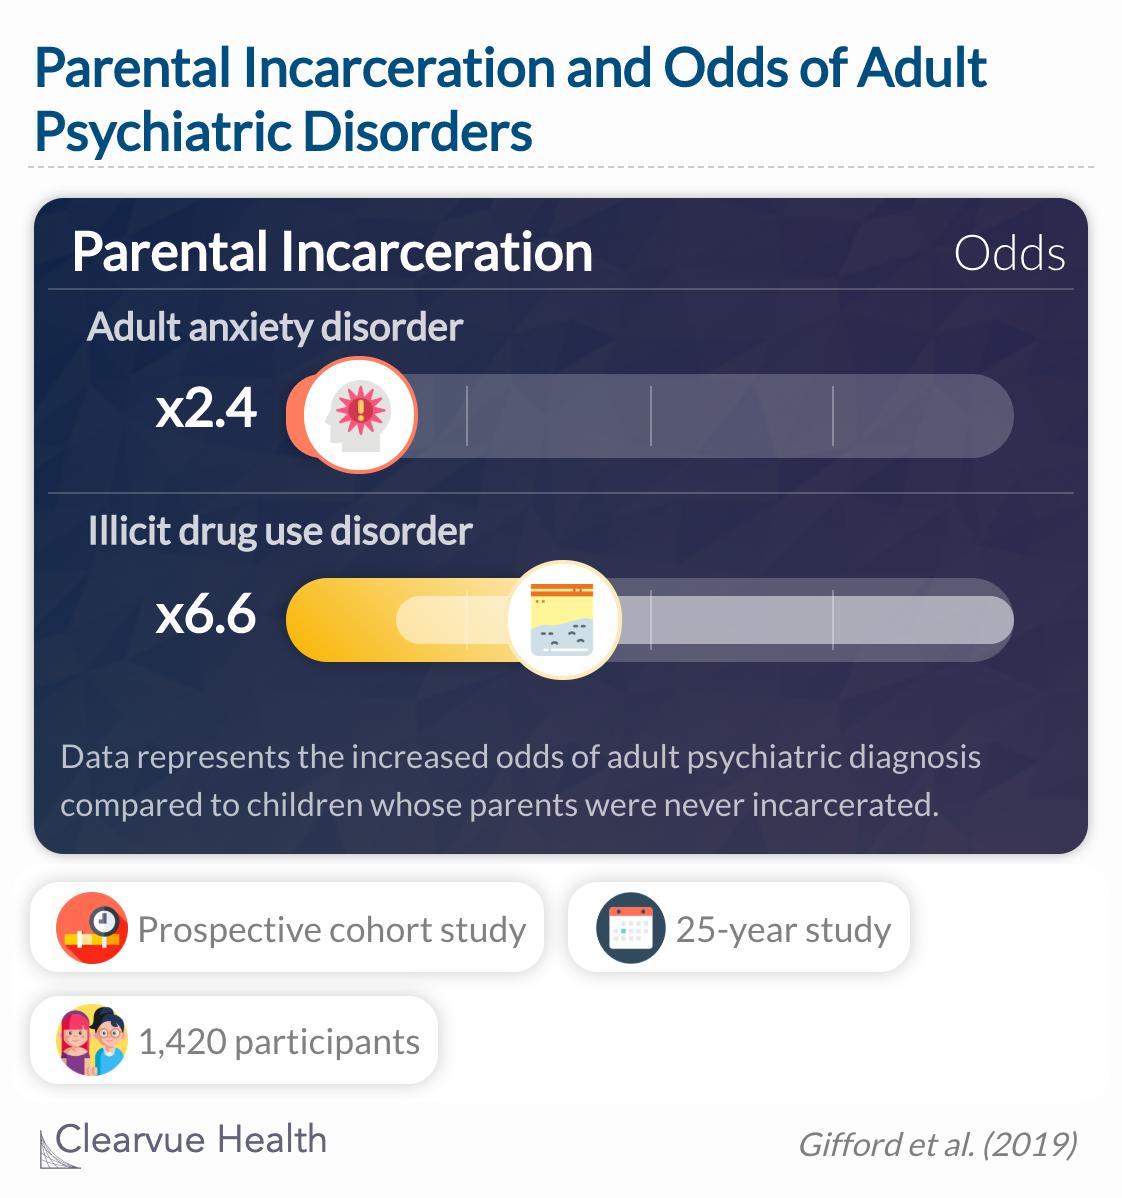  This study suggests that parental incarceration is associated with a broad range of psychiatric, legal, financial, and social outcomes during young adulthood.